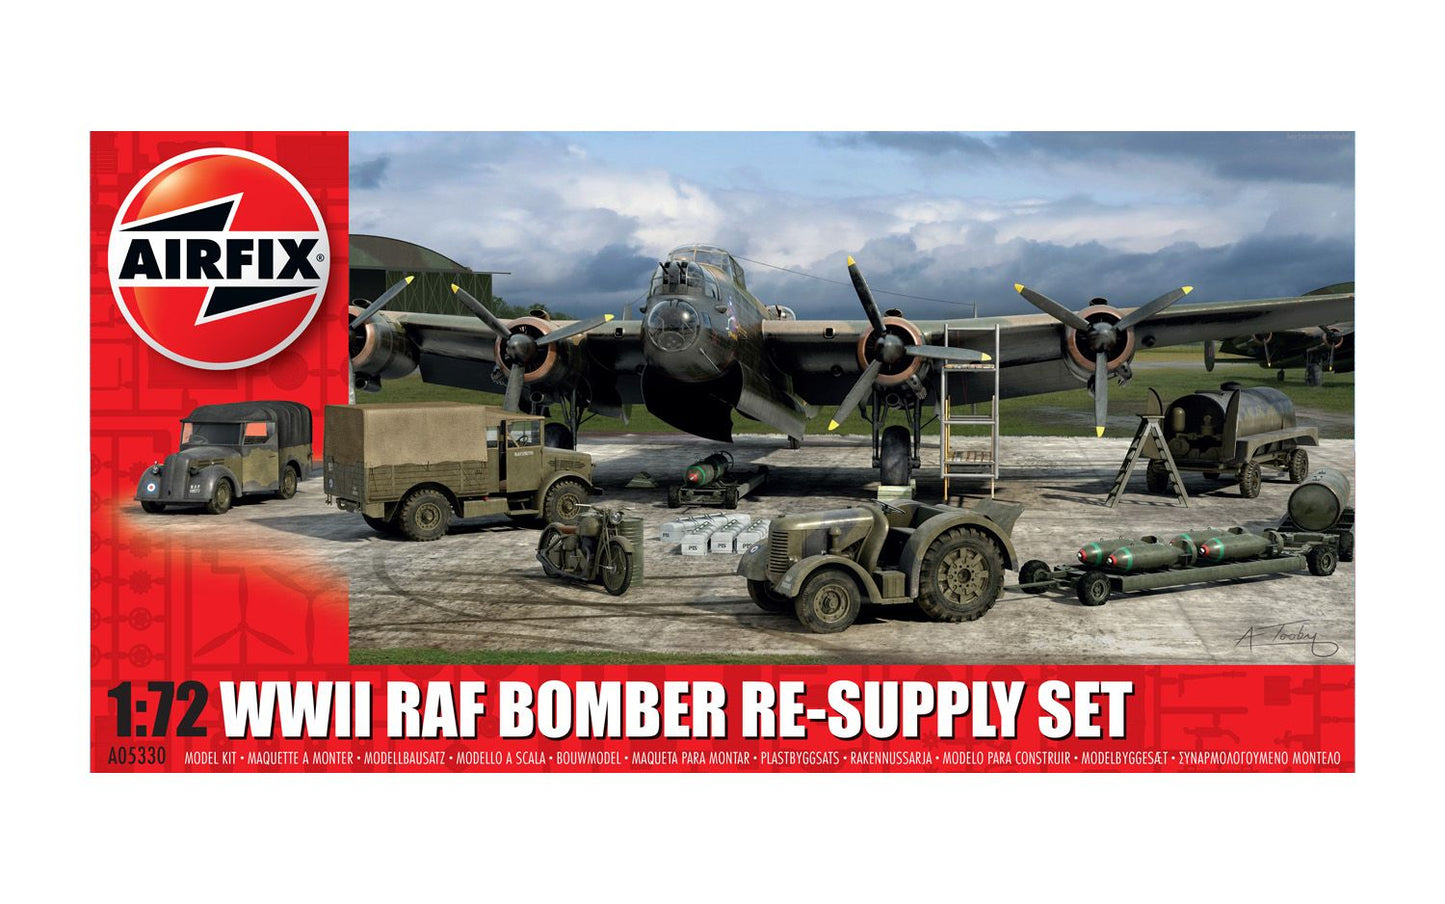 Airfix 1/72nd scale WWII RAF Bomber Resupply Set